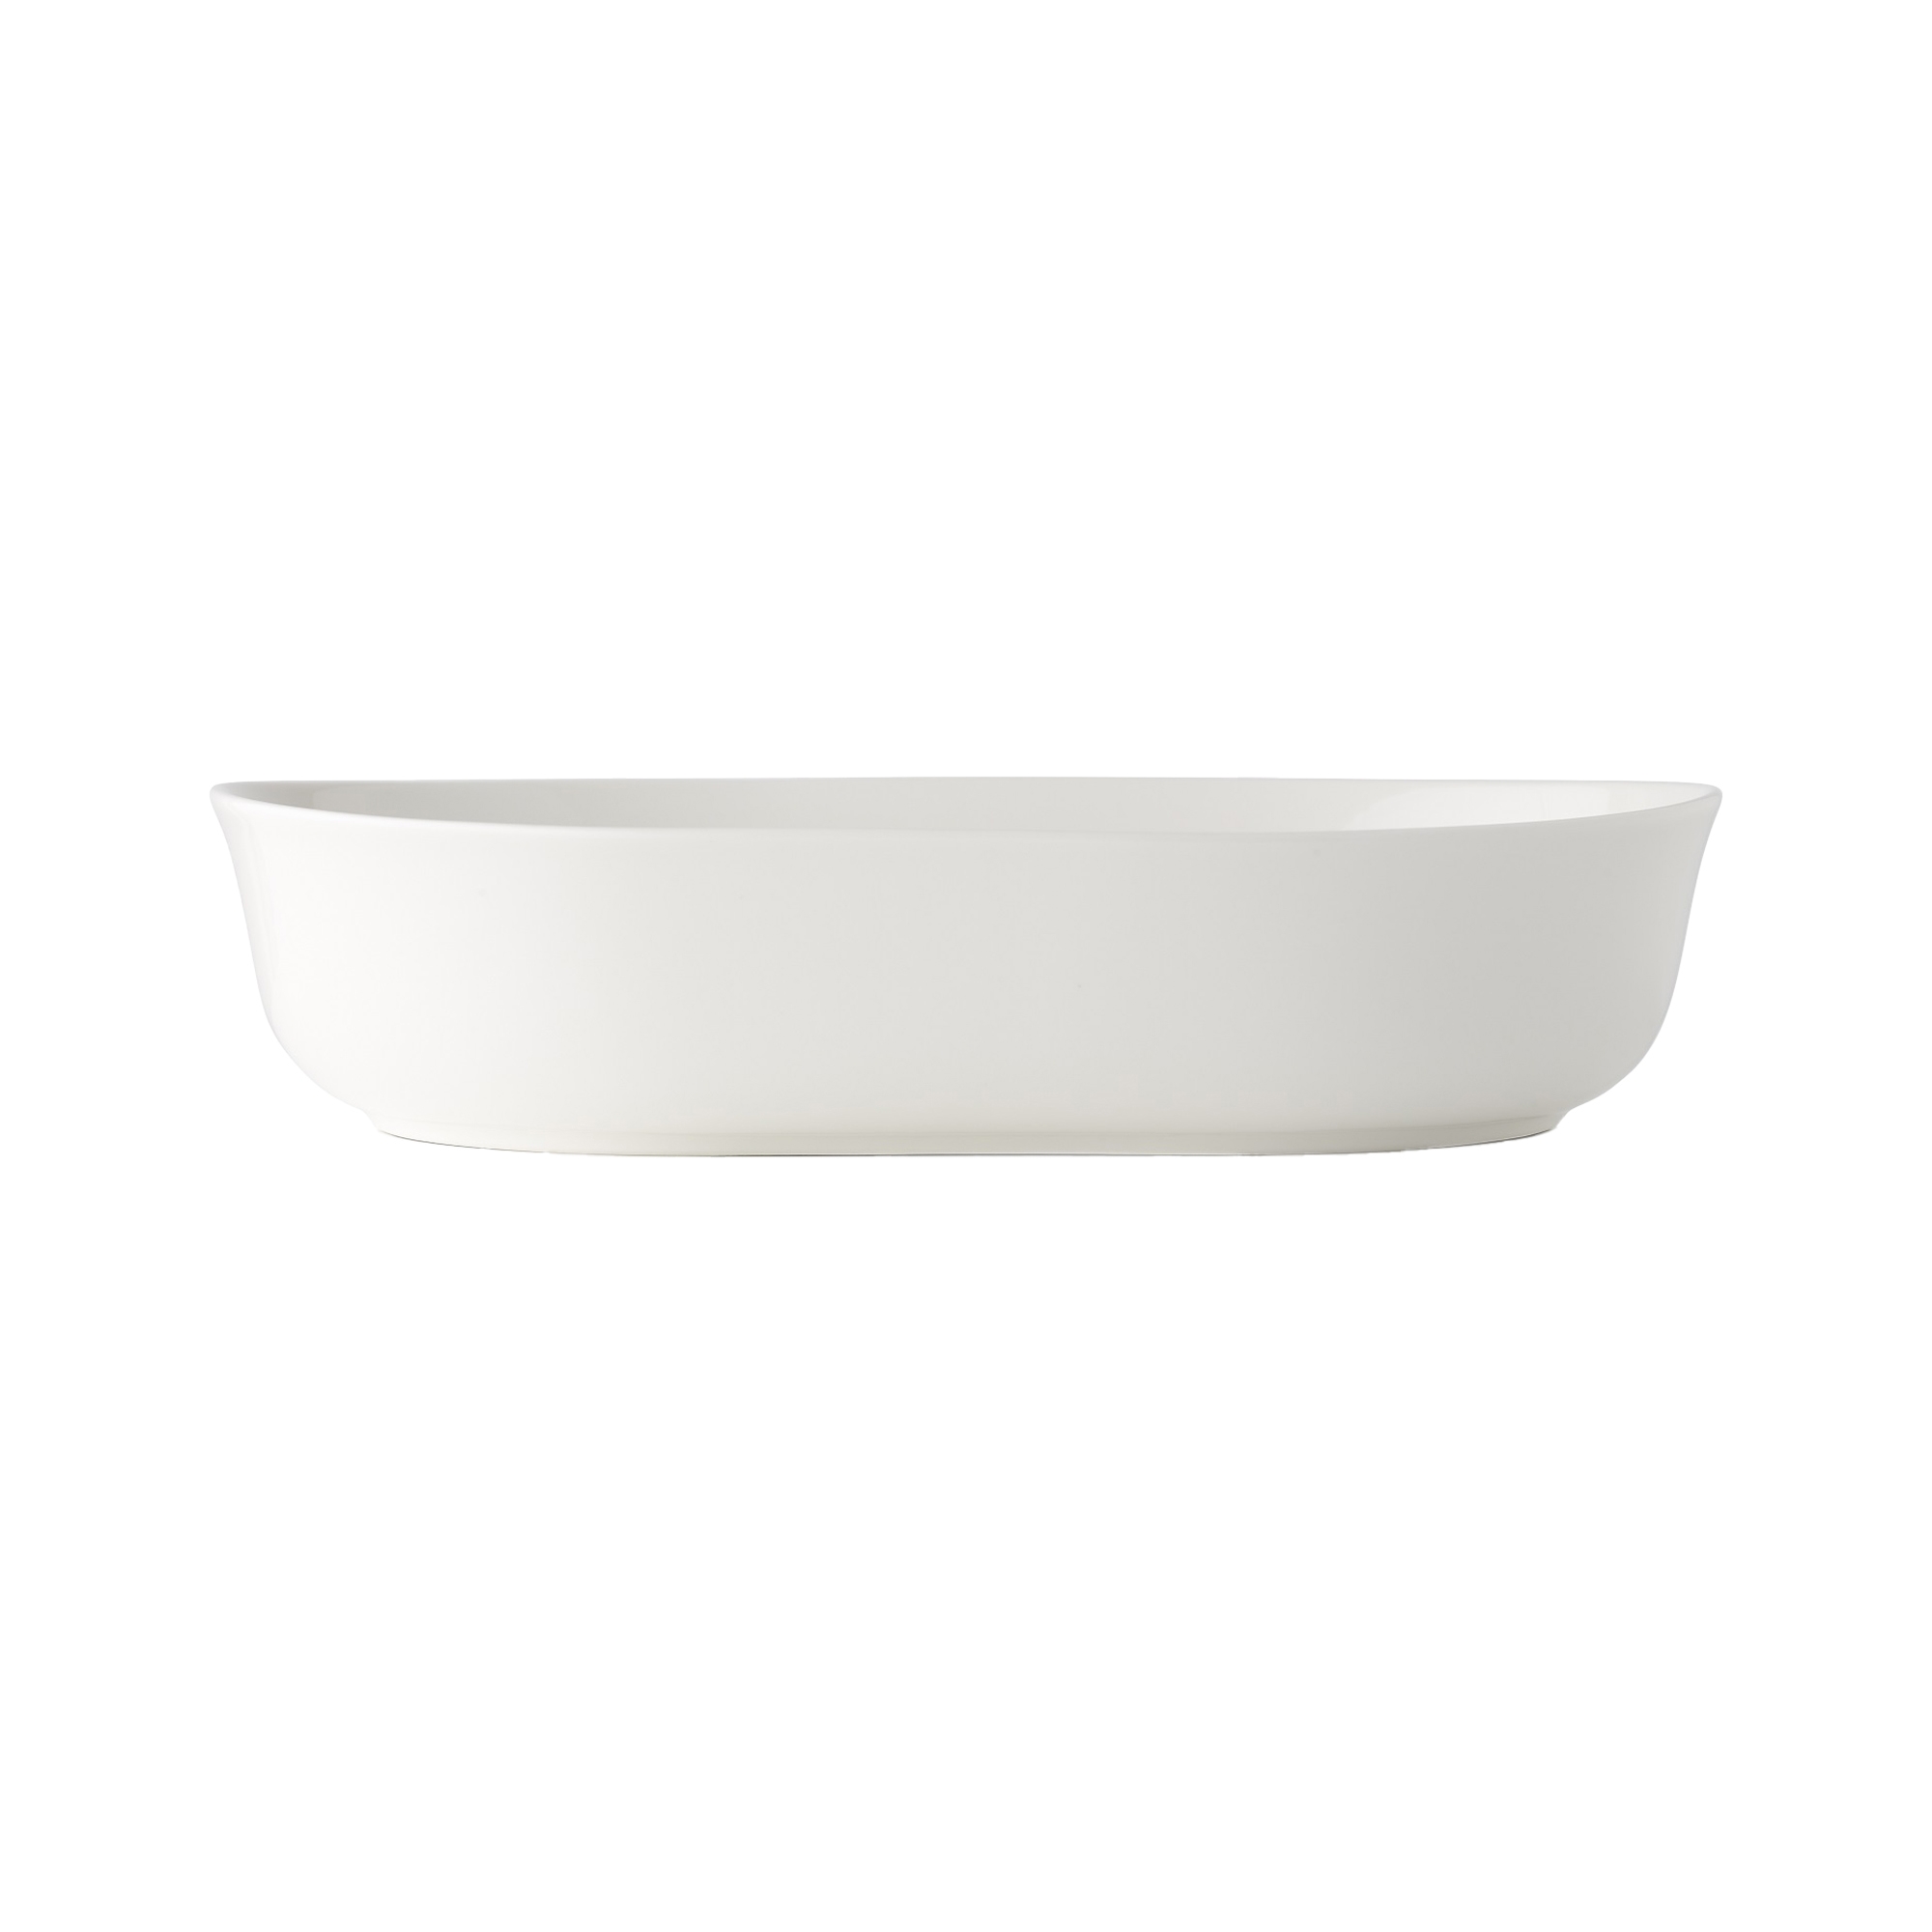 Noritake Everyday by Adam Liaw Oblong Serving Bowl 24cm White Image 1